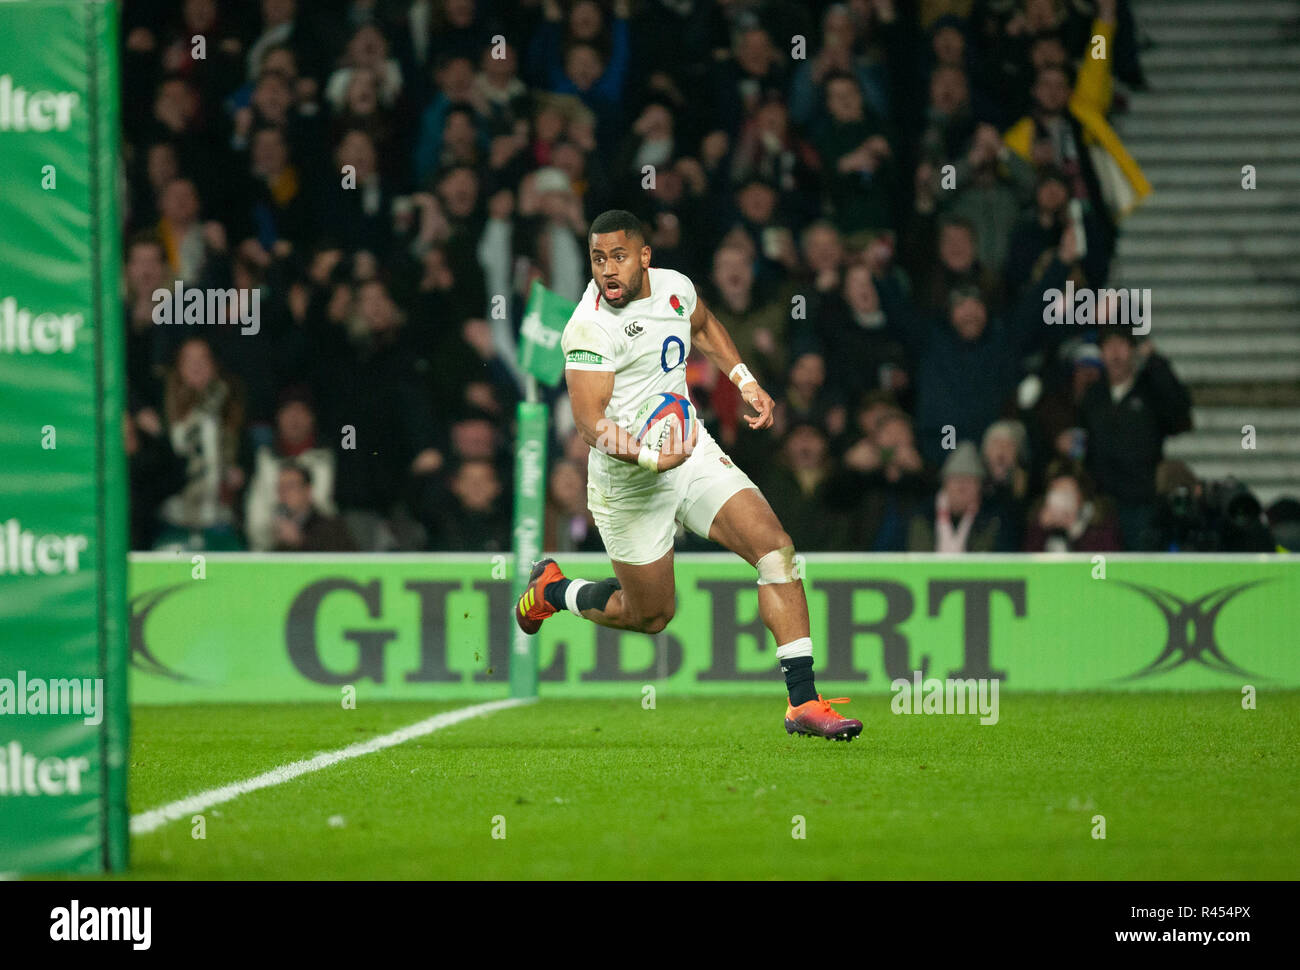 Twickenham, UK. 24th November 2018. Joe Cokanasiga scores England's 3rd try during the Quilter International Rugby match between England and Australia. Andrew Taylor/Alamy Live News Stock Photo